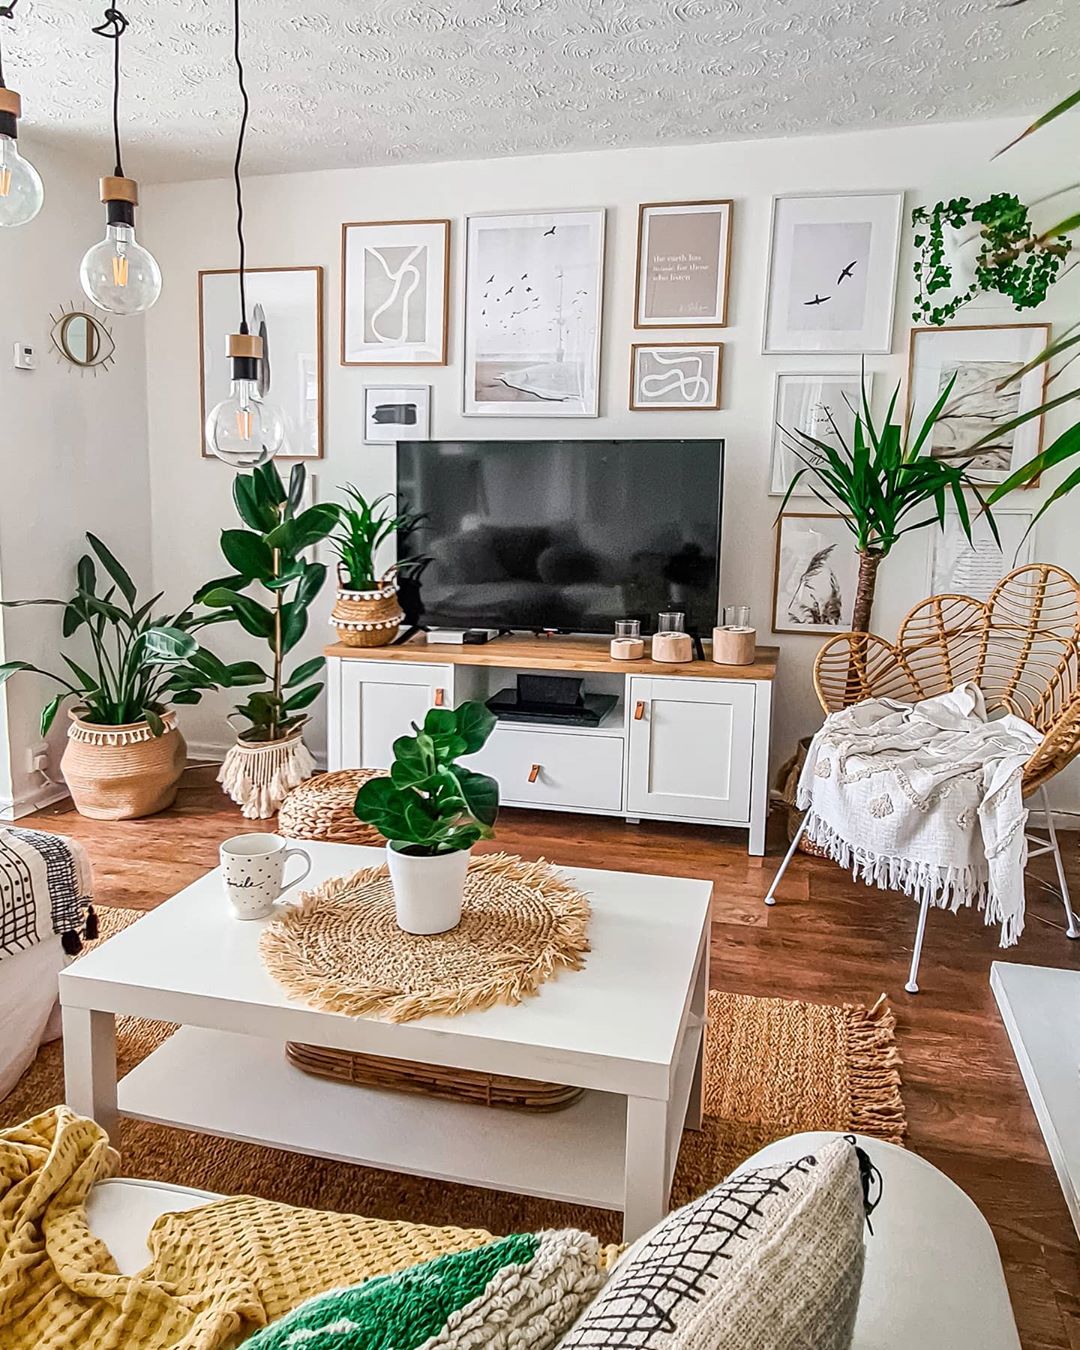 How To Decorate A Small Living Room: Maximize Space With Creative Design Solutions